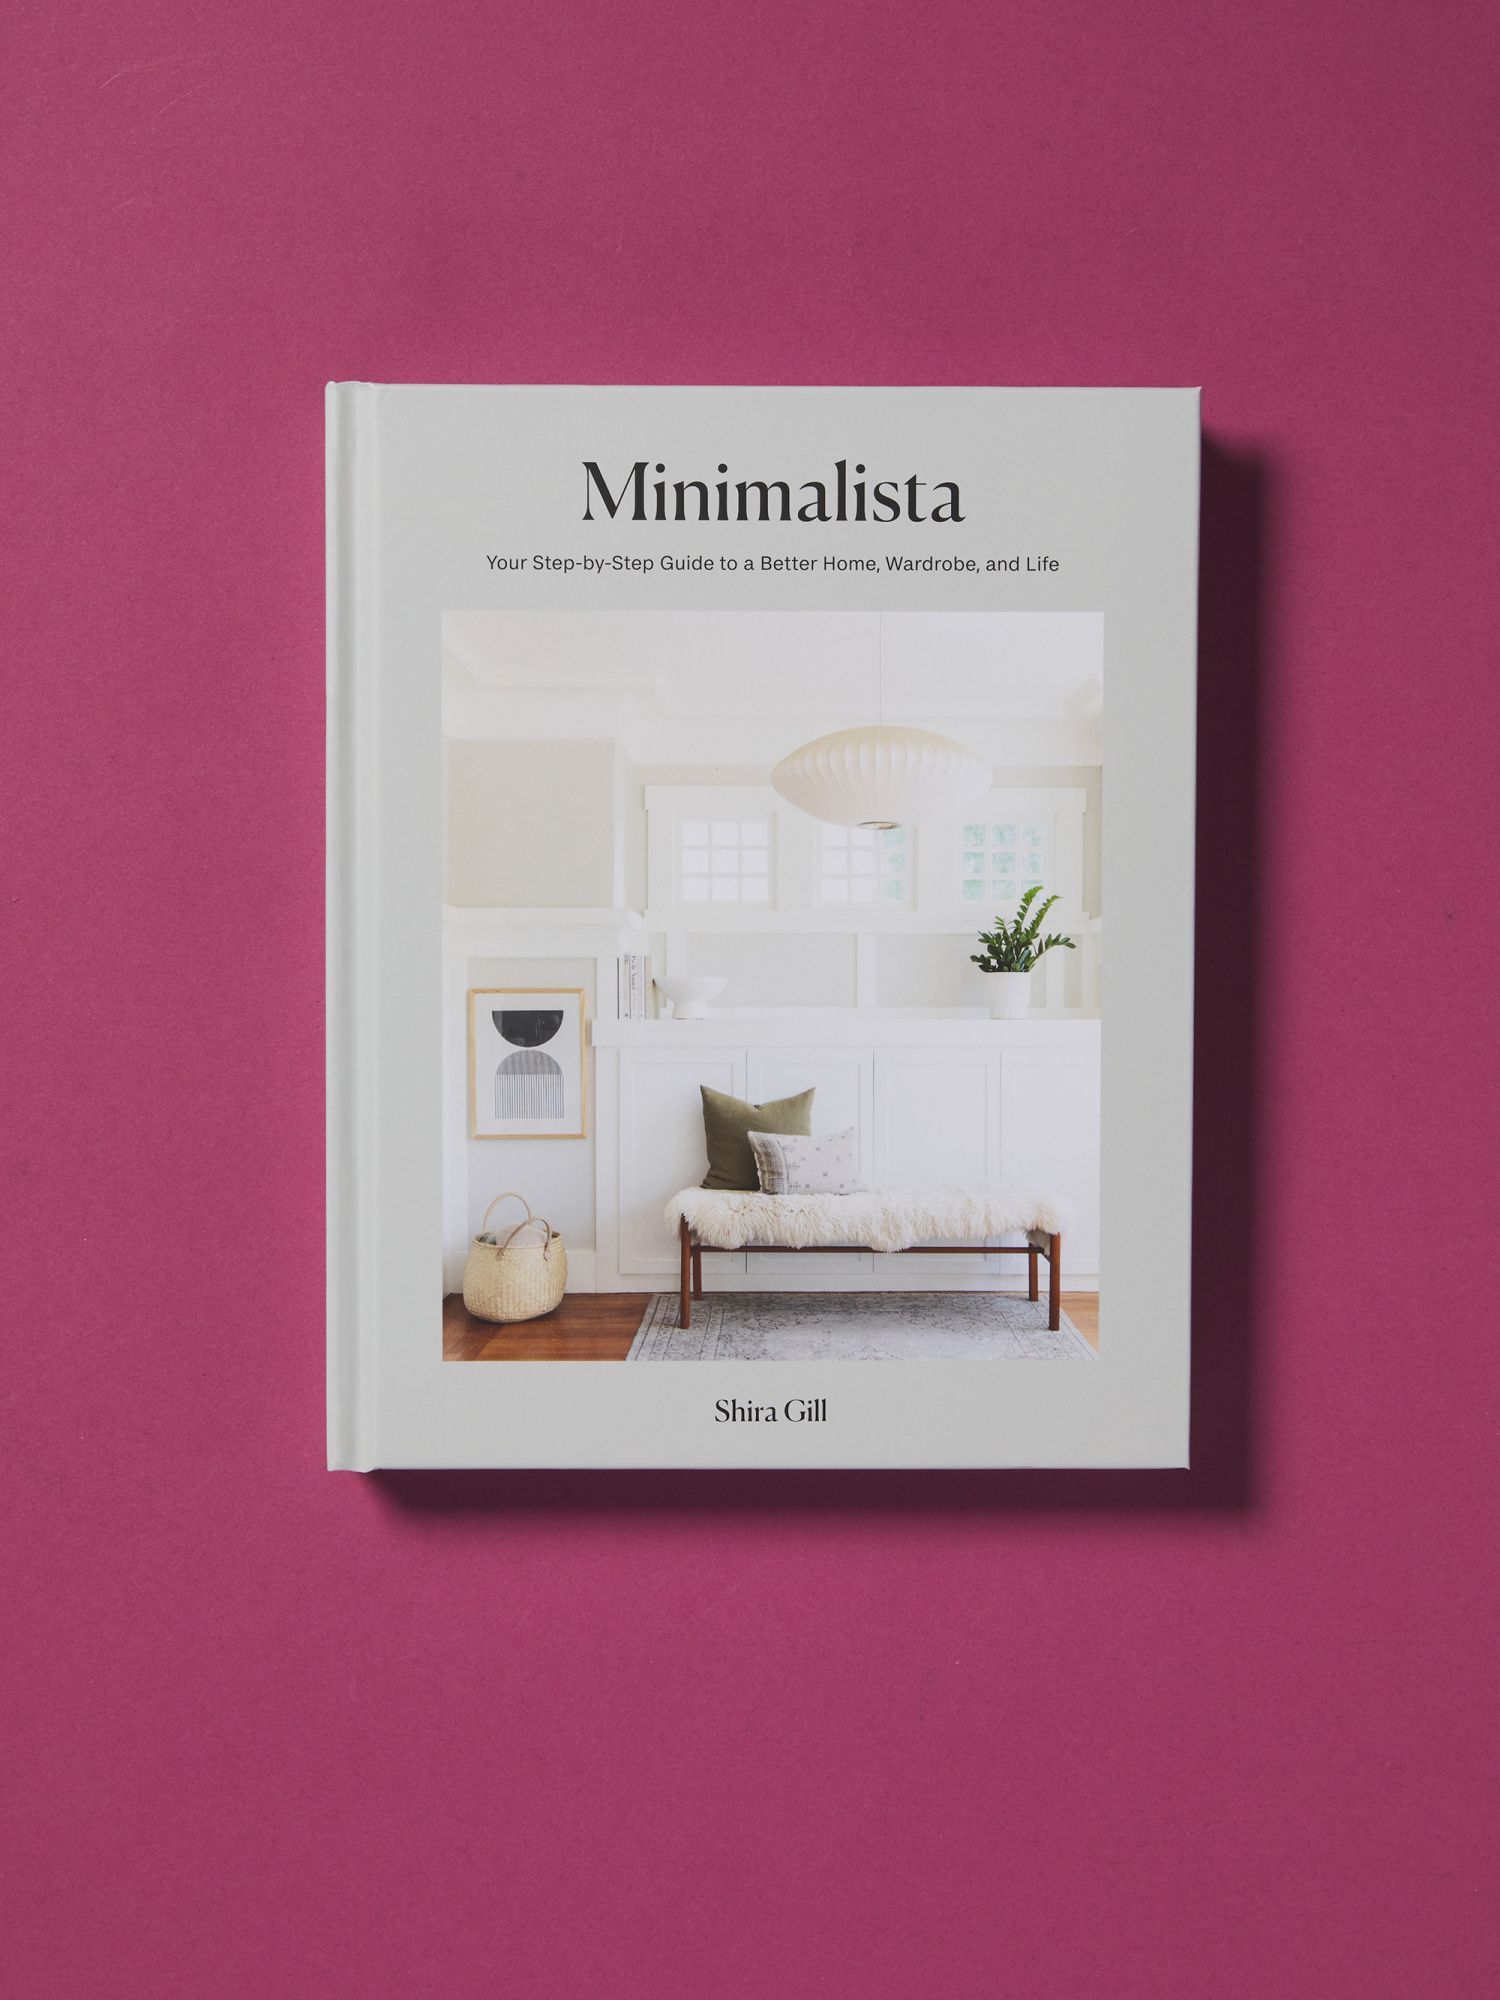 Minimalista Hardcover Coffee Table Book | Decorative Accents | HomeGoods | HomeGoods